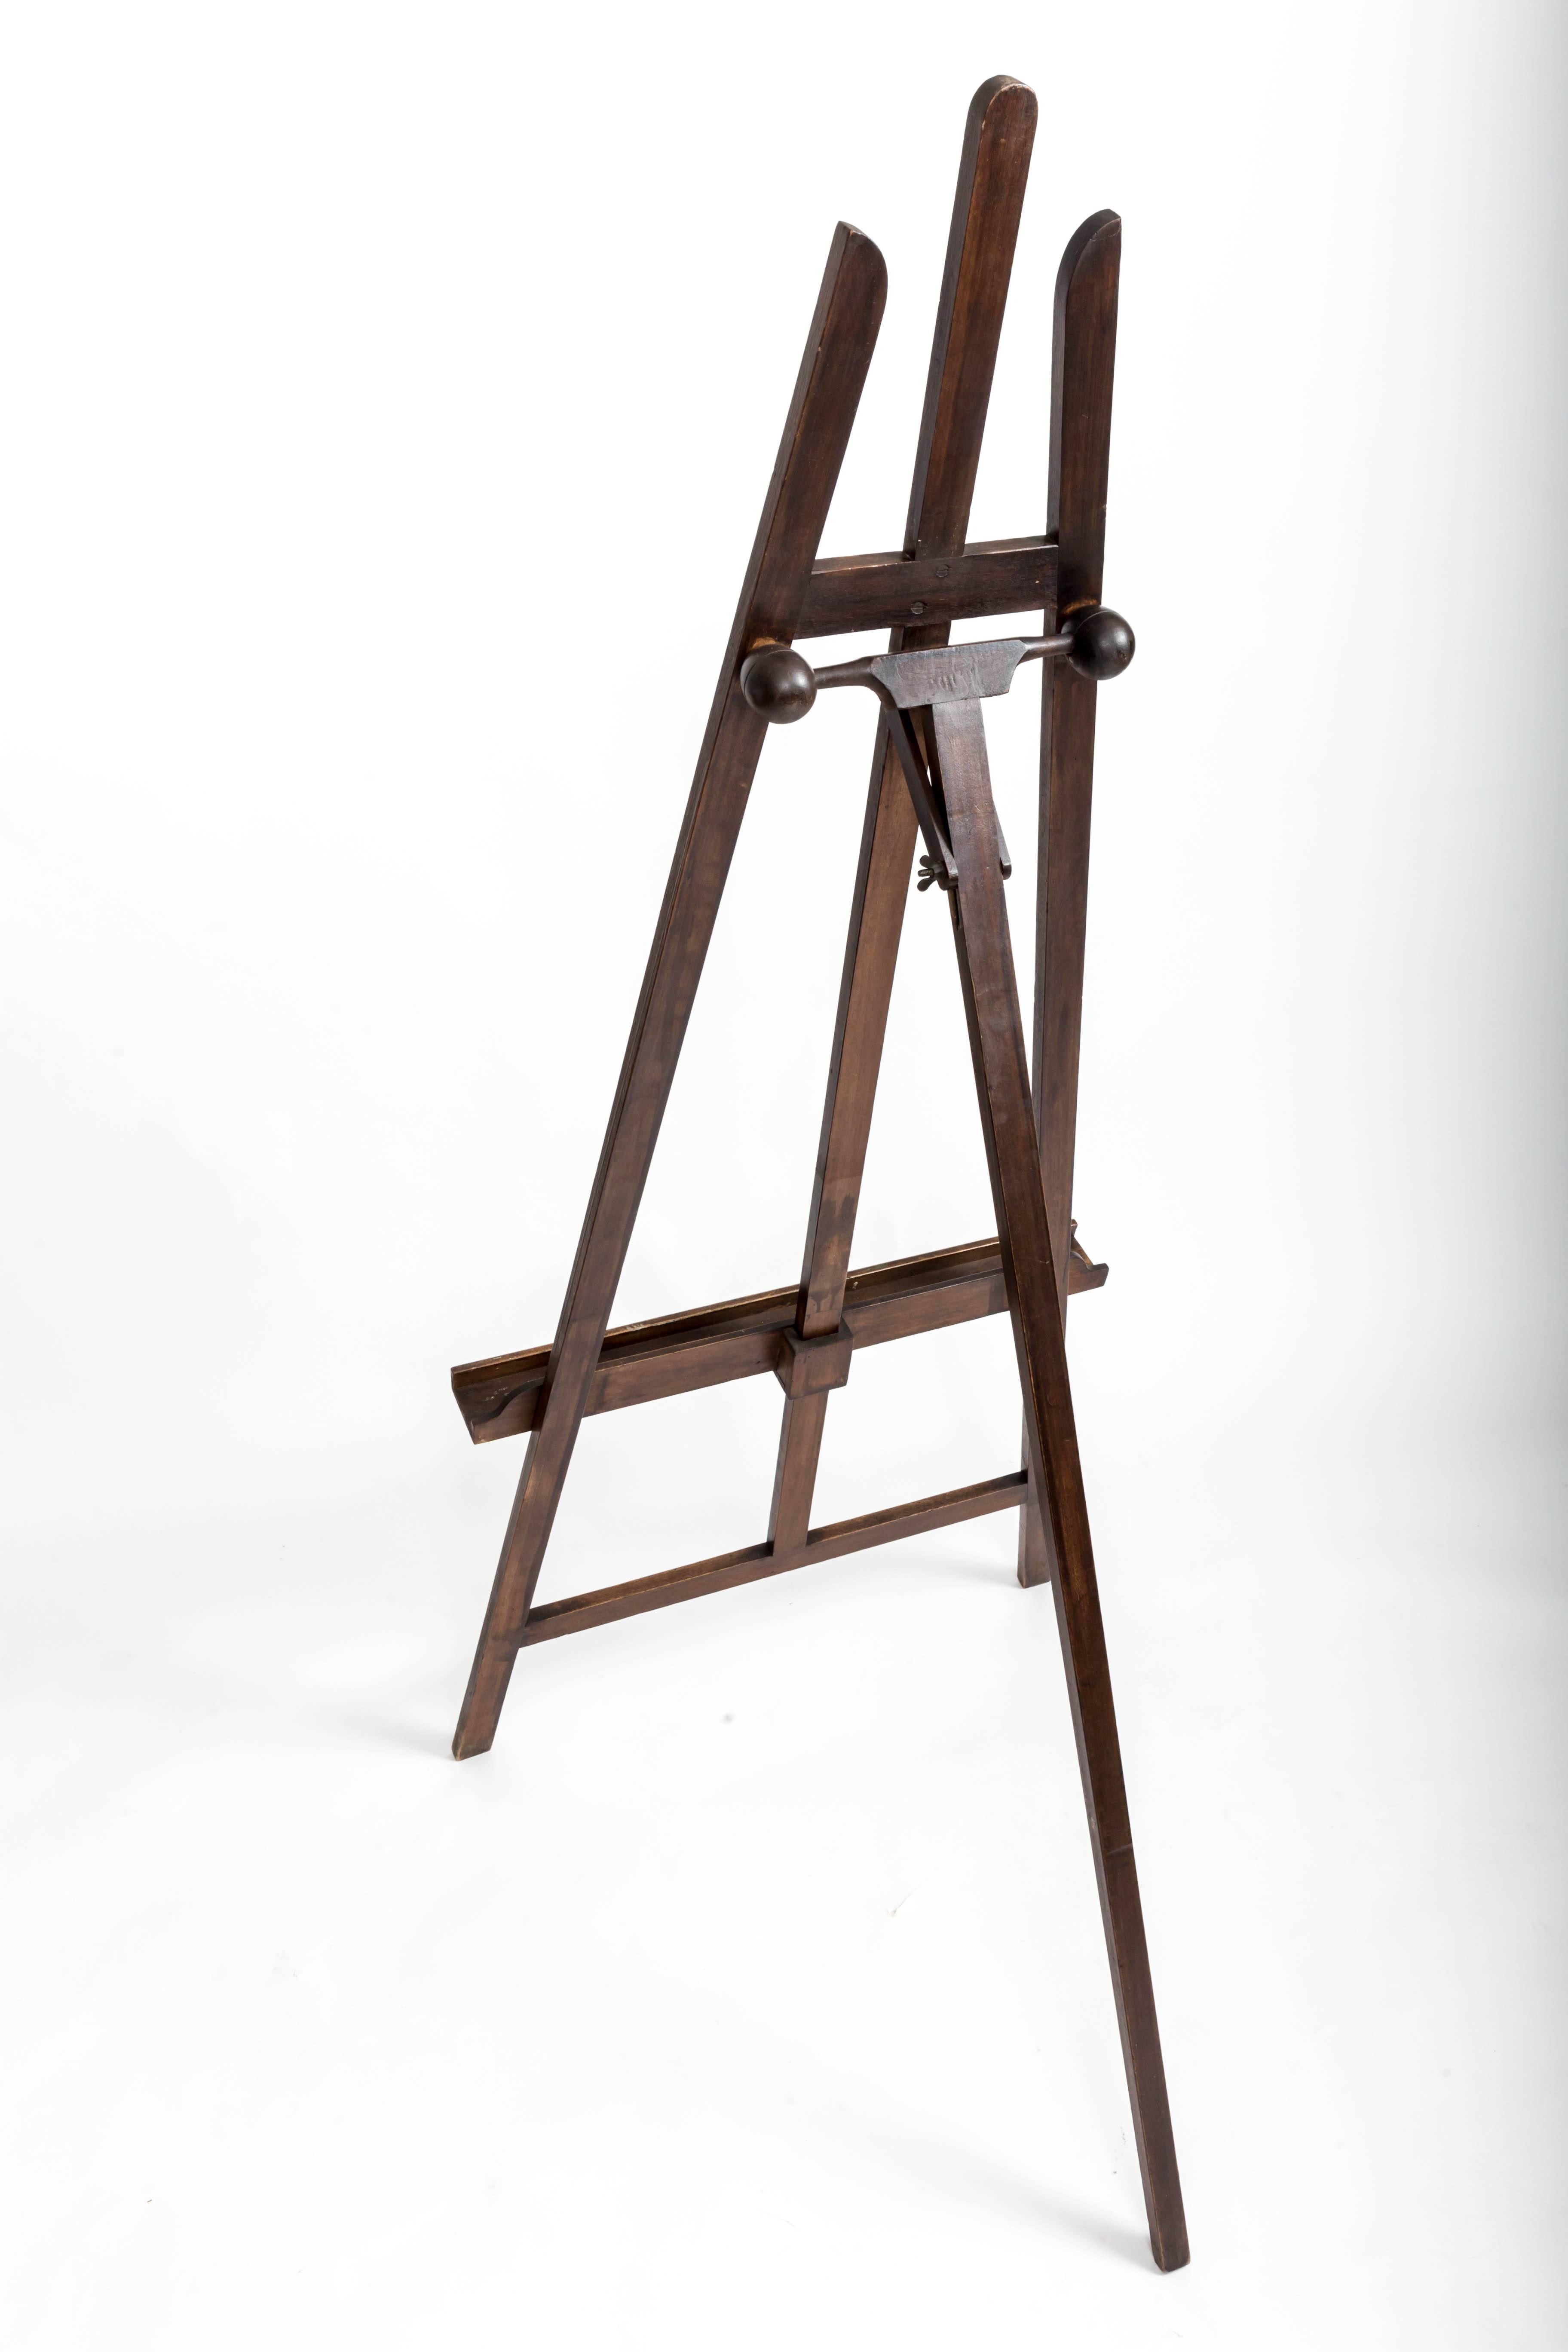 Adjustable racket picture easel.